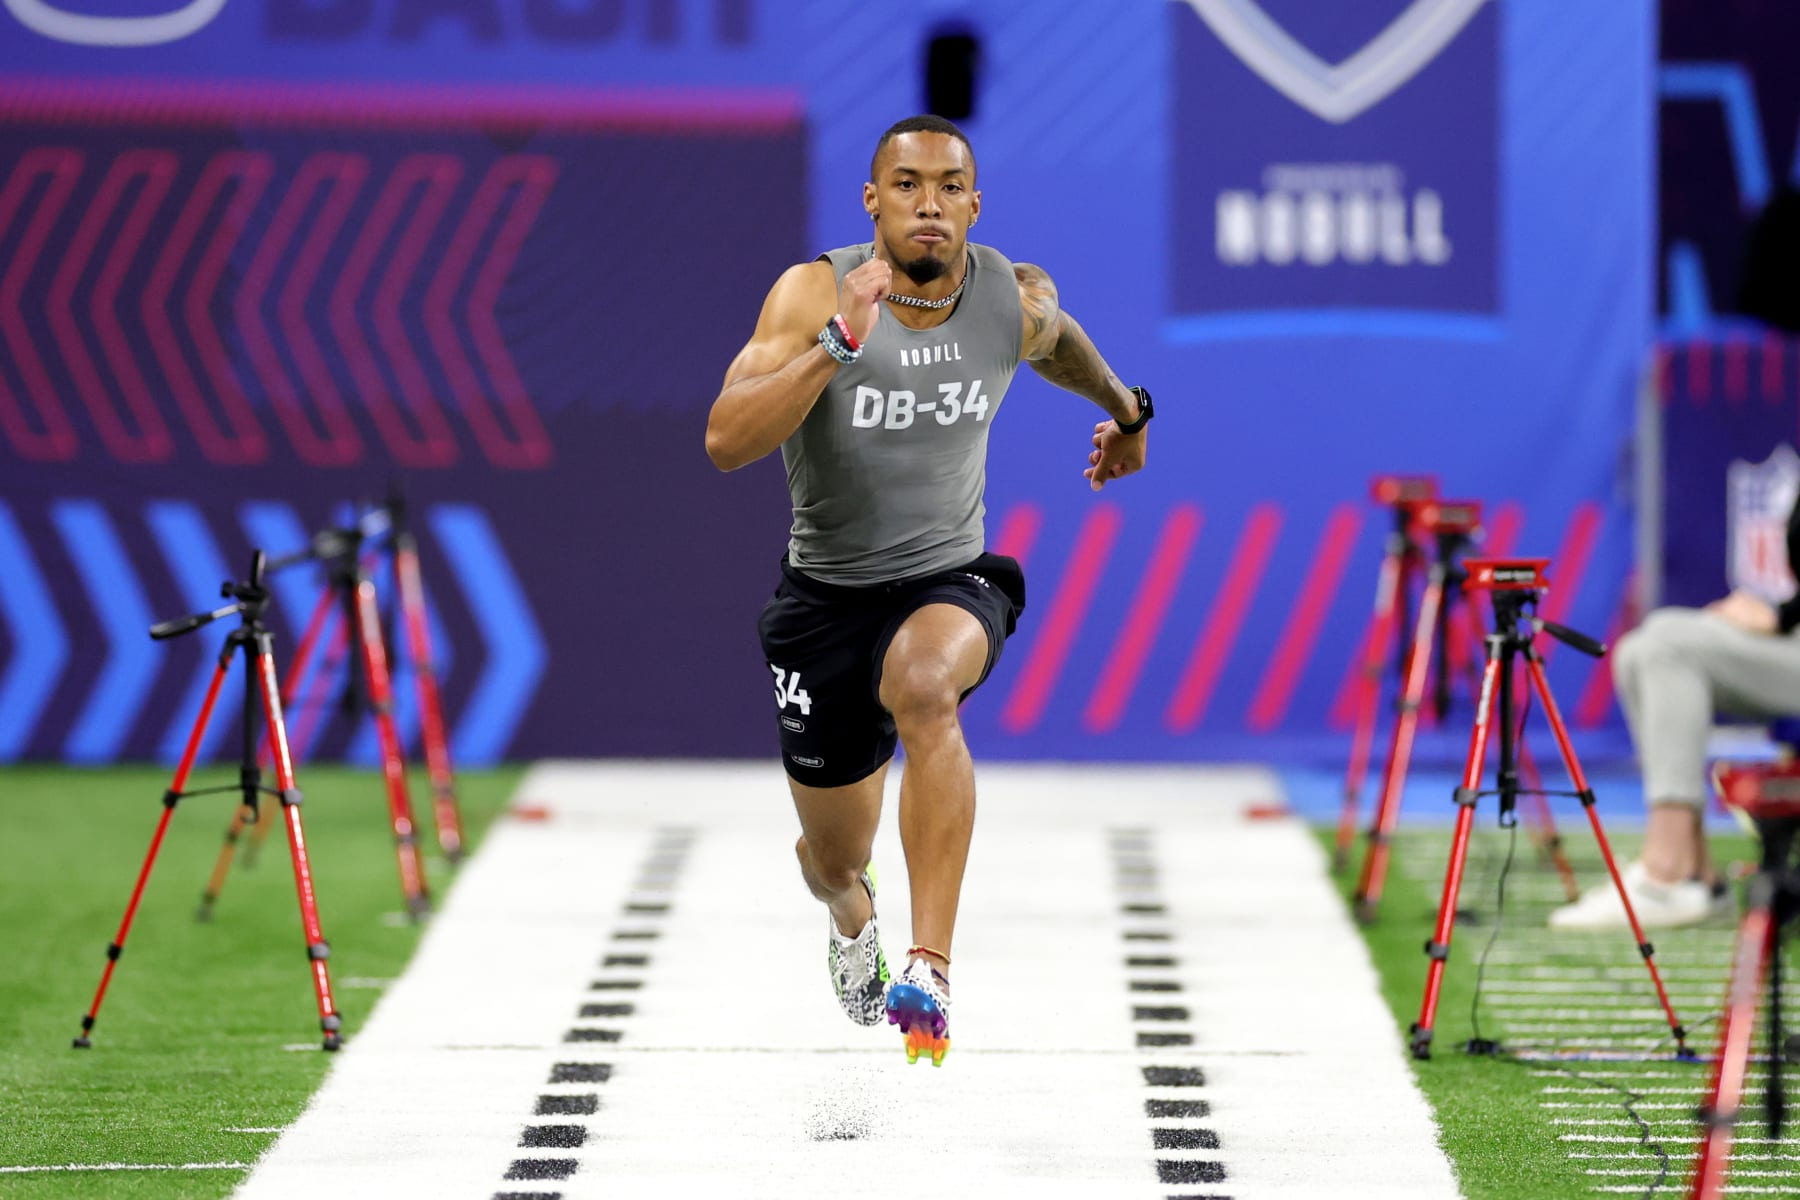 NFL Combine: Ups & downs at Friday's session